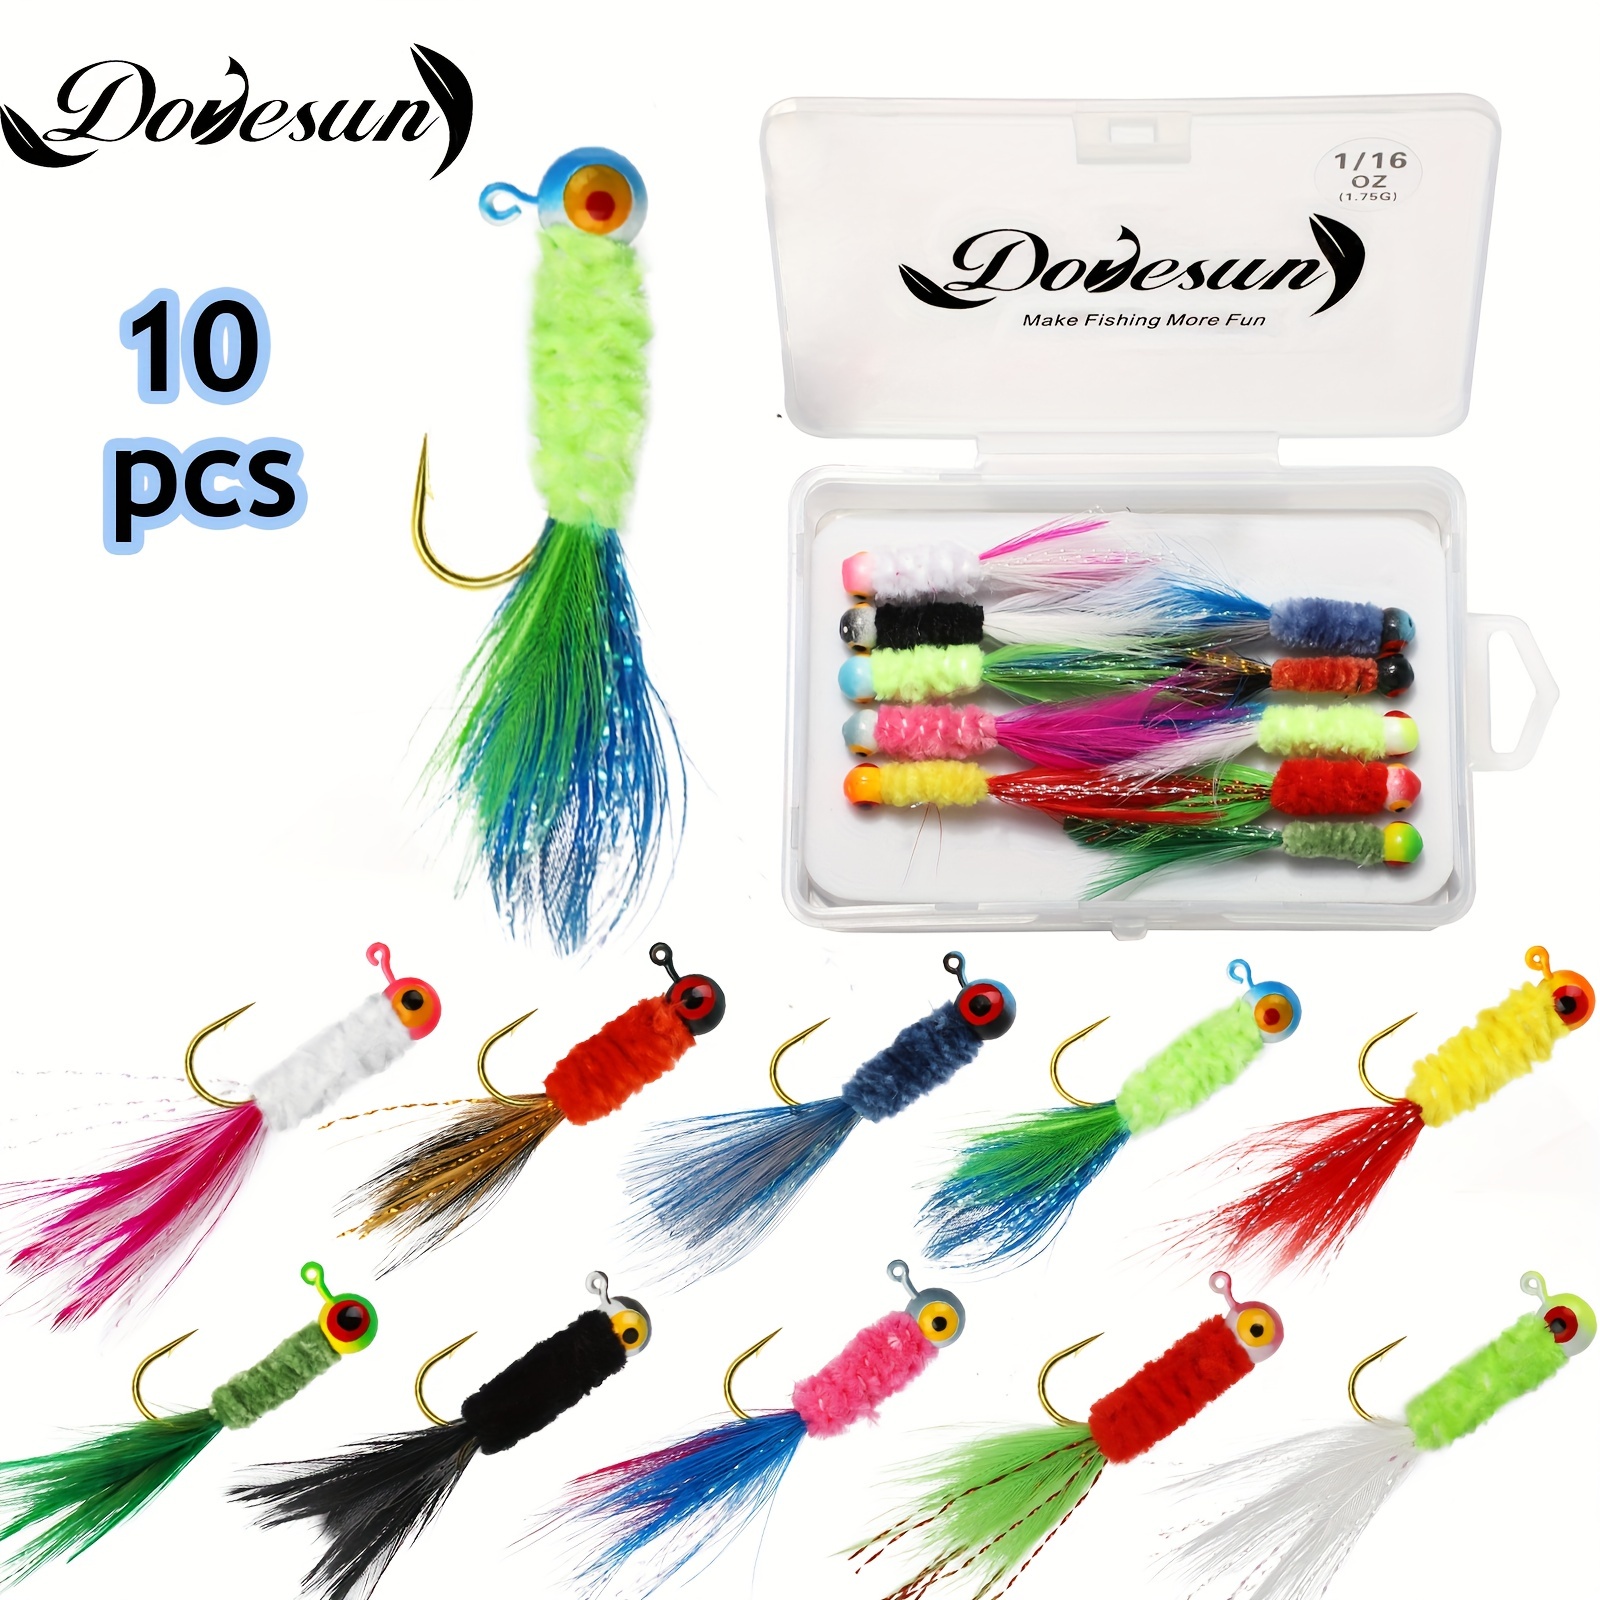 Dovesun Crappie Jigs Jig Heads Fishing Bait With Feather For